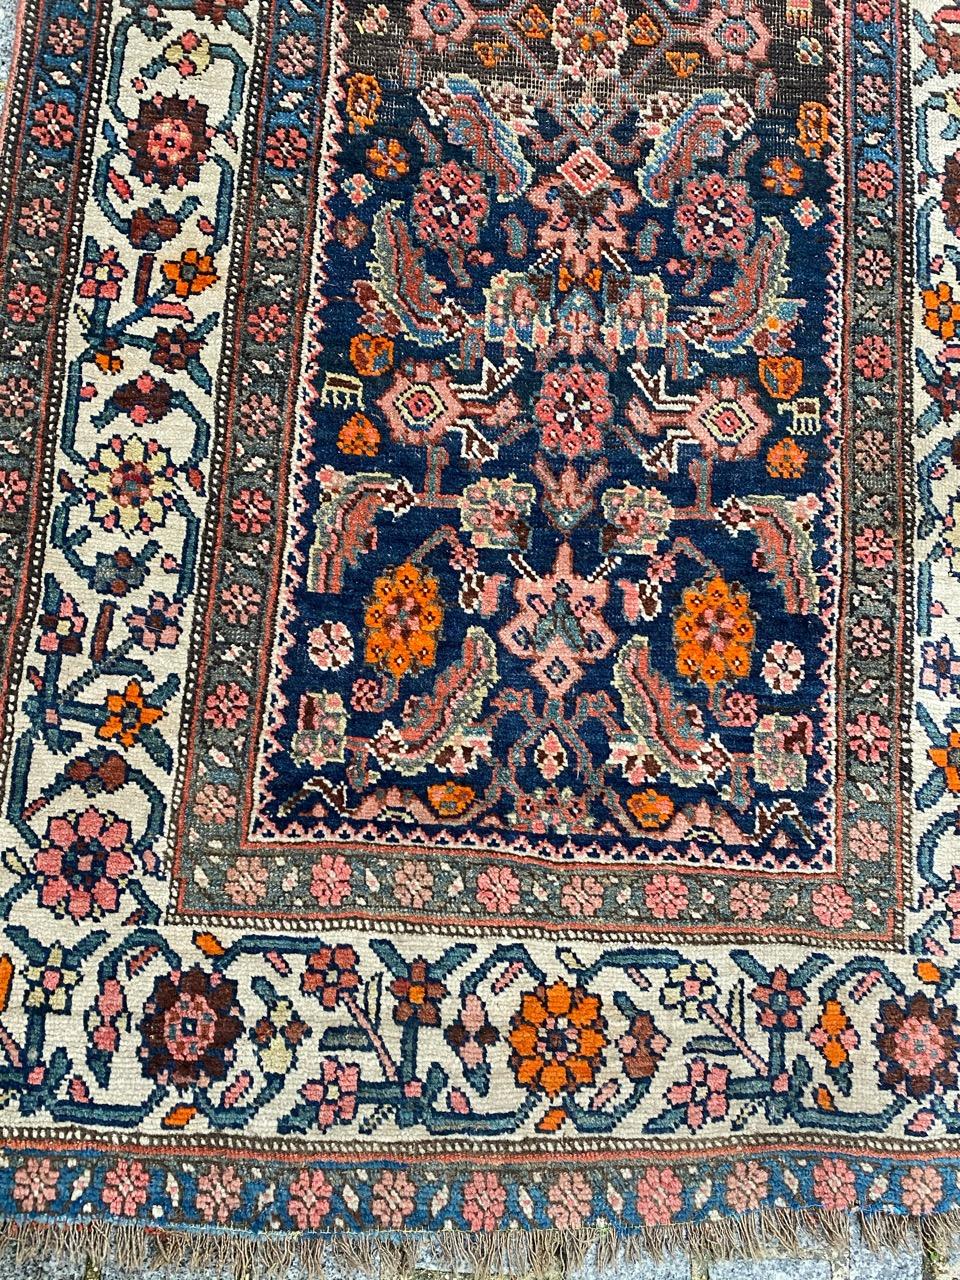 Very beautiful and rare antique runner with beautiful design and natural colors, entirely hand knotted with wool velvet on wool foundation.

✨✨✨
